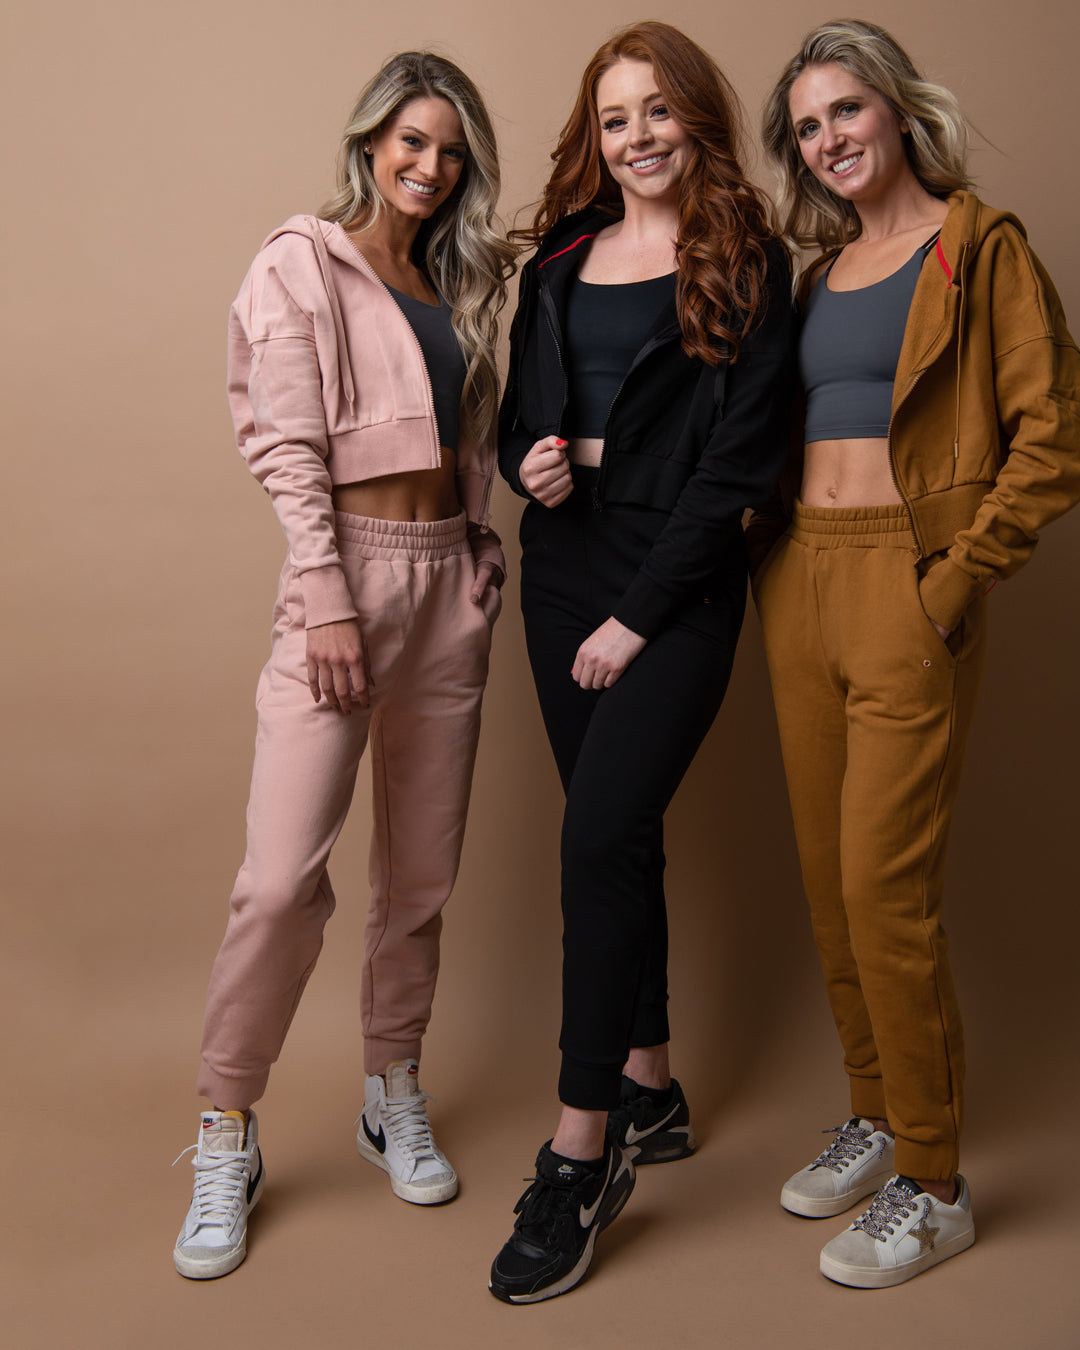 KADYLUXE® womens fleece sweatpant in dusty rose, black and camel colorways.